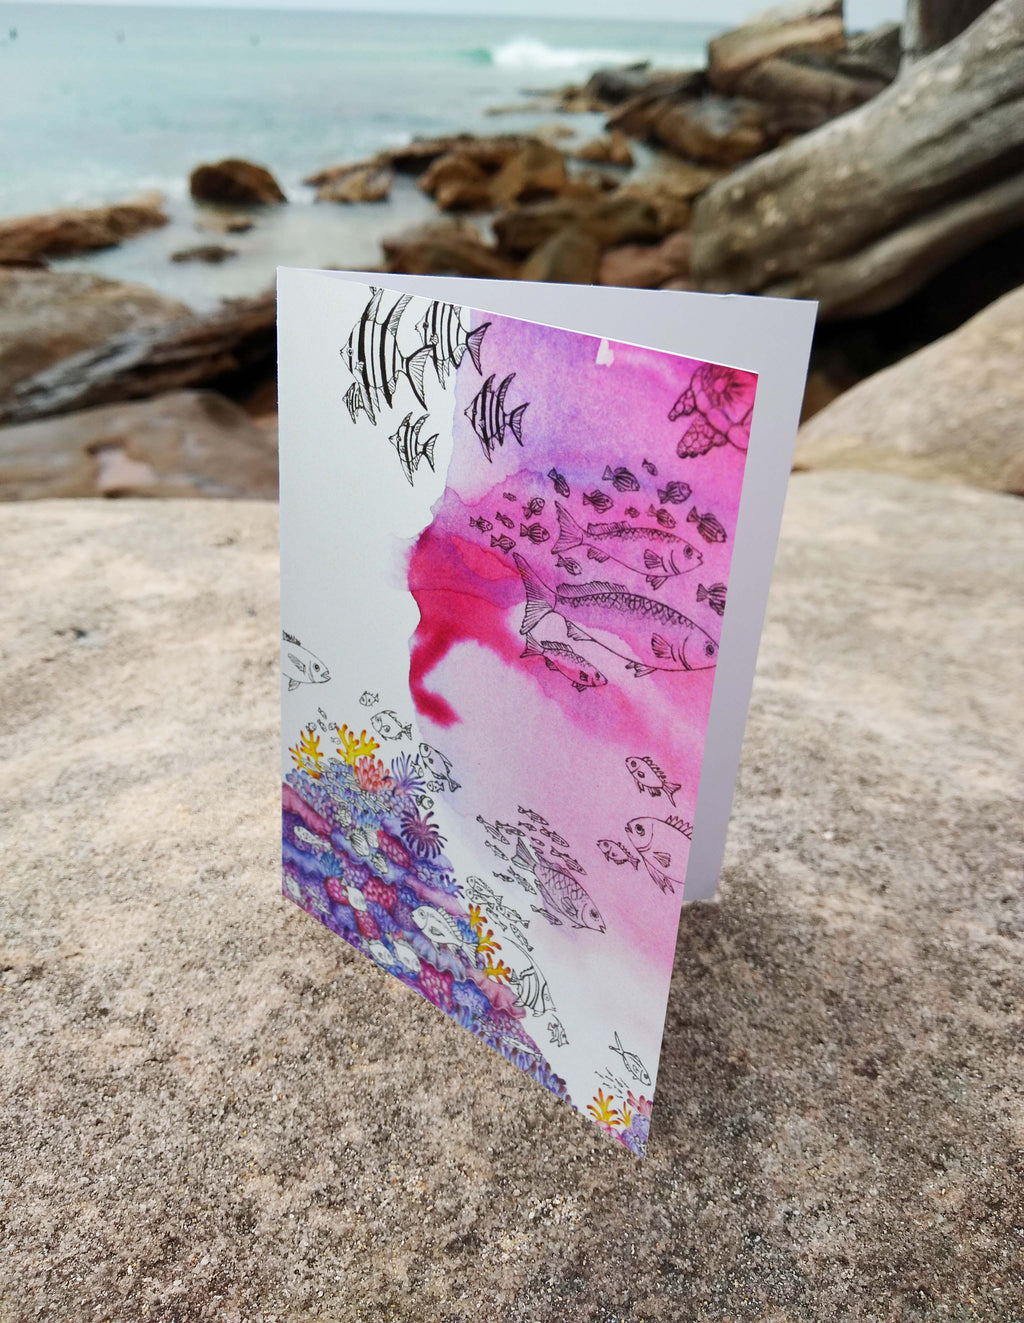 Manly Shelly Beach #3 (greeting card)